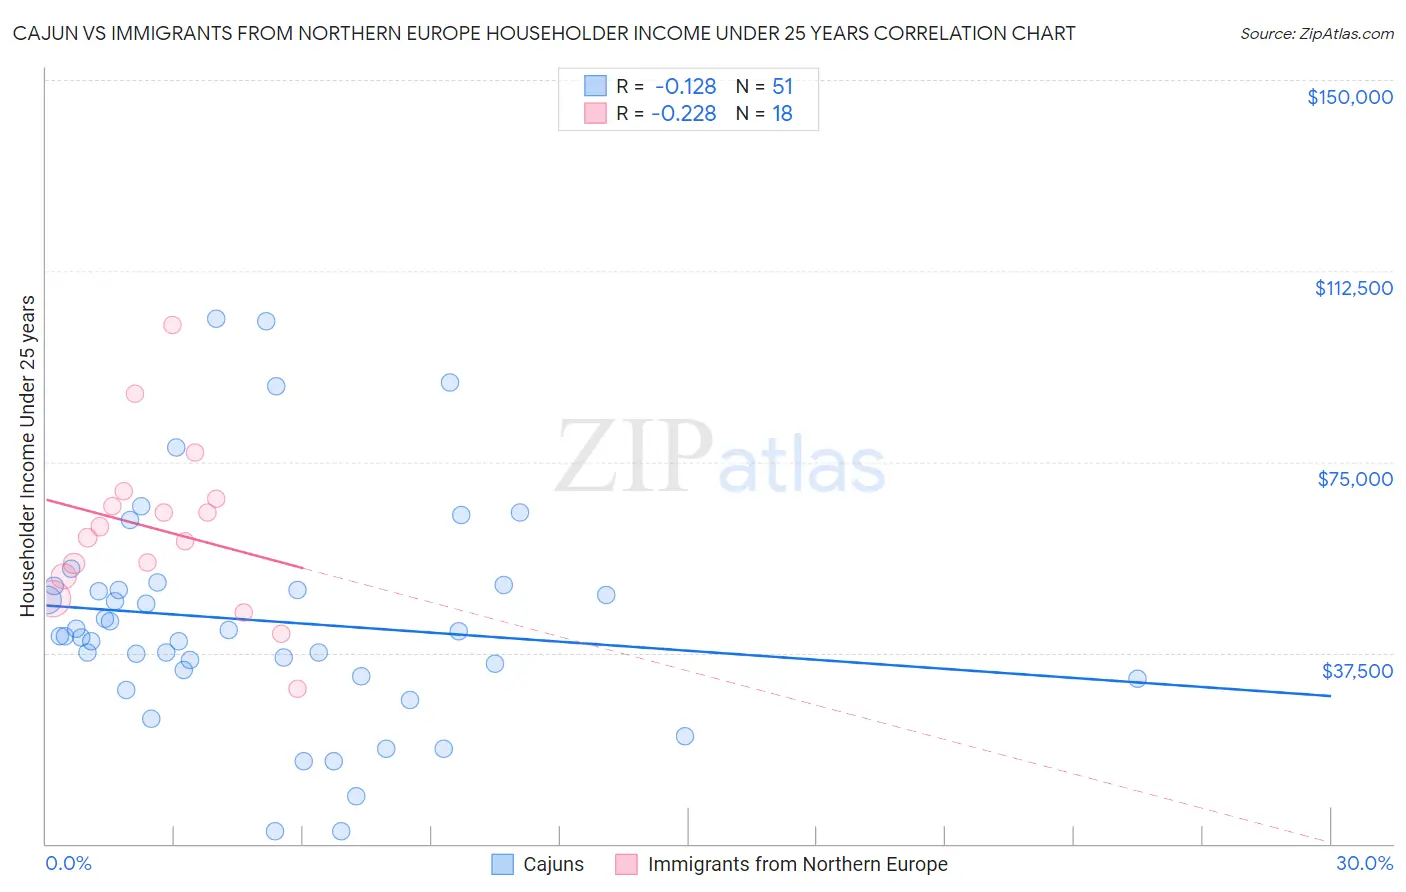 Cajun vs Immigrants from Northern Europe Householder Income Under 25 years